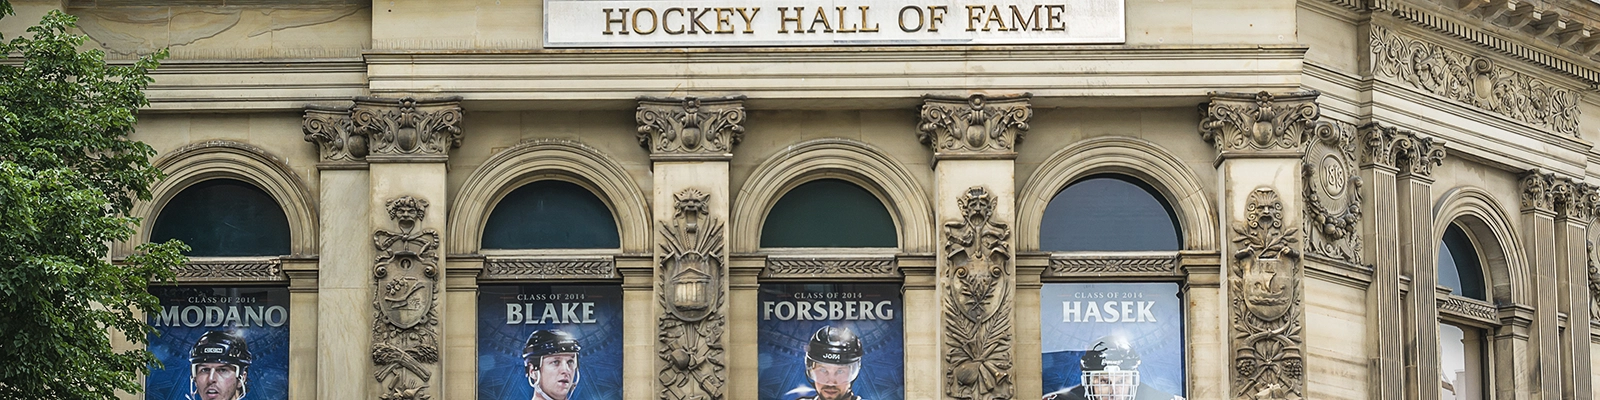 Hockey Hall of Fame entrance with famous players' statues and museum exhibits in the background